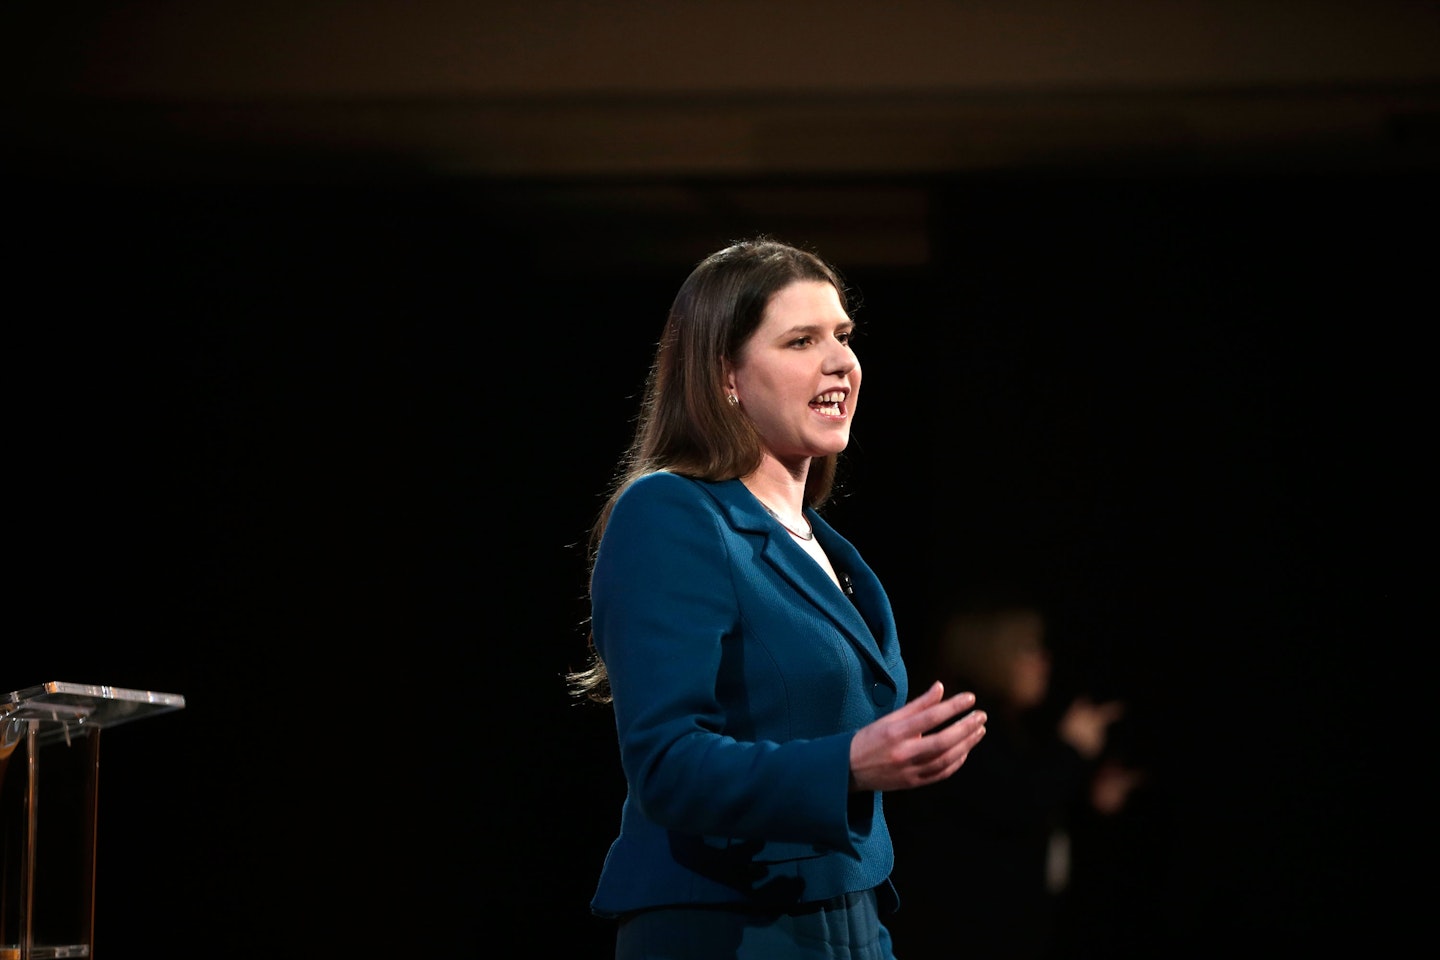 Jo Swinson at the Liberal Democrat party conference